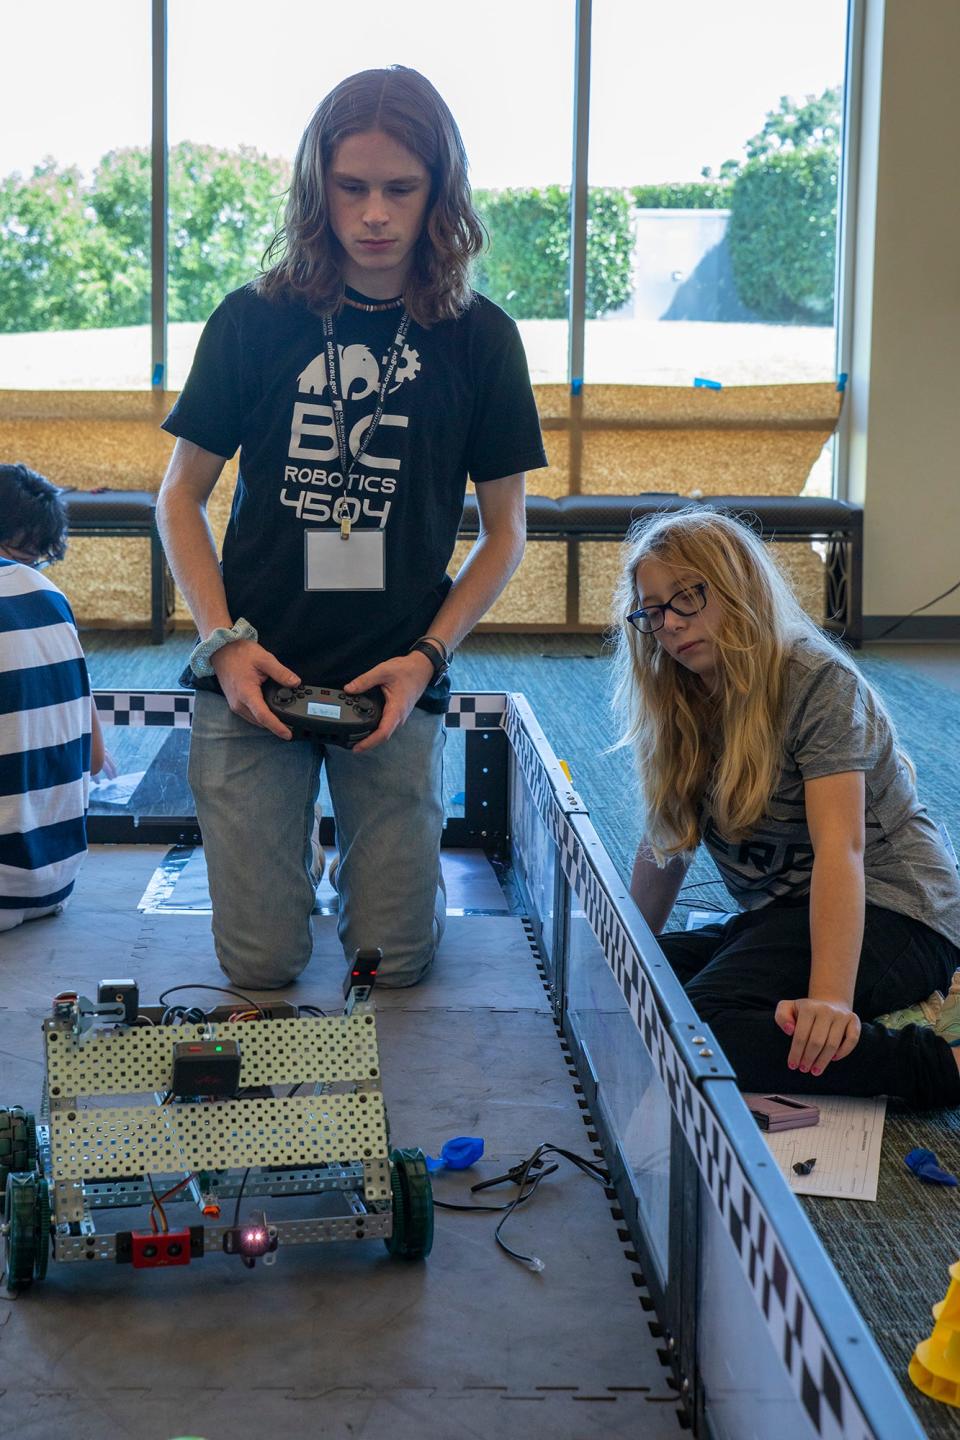 Gavin Good and Phoenix Tyner work together to program their robot. They went on to win the robot skills competition that capped off the ORISE Advanced Robotics Academy. For their victory, they received a sensor kit to enhance the robot tinker kits received by all academy participants.